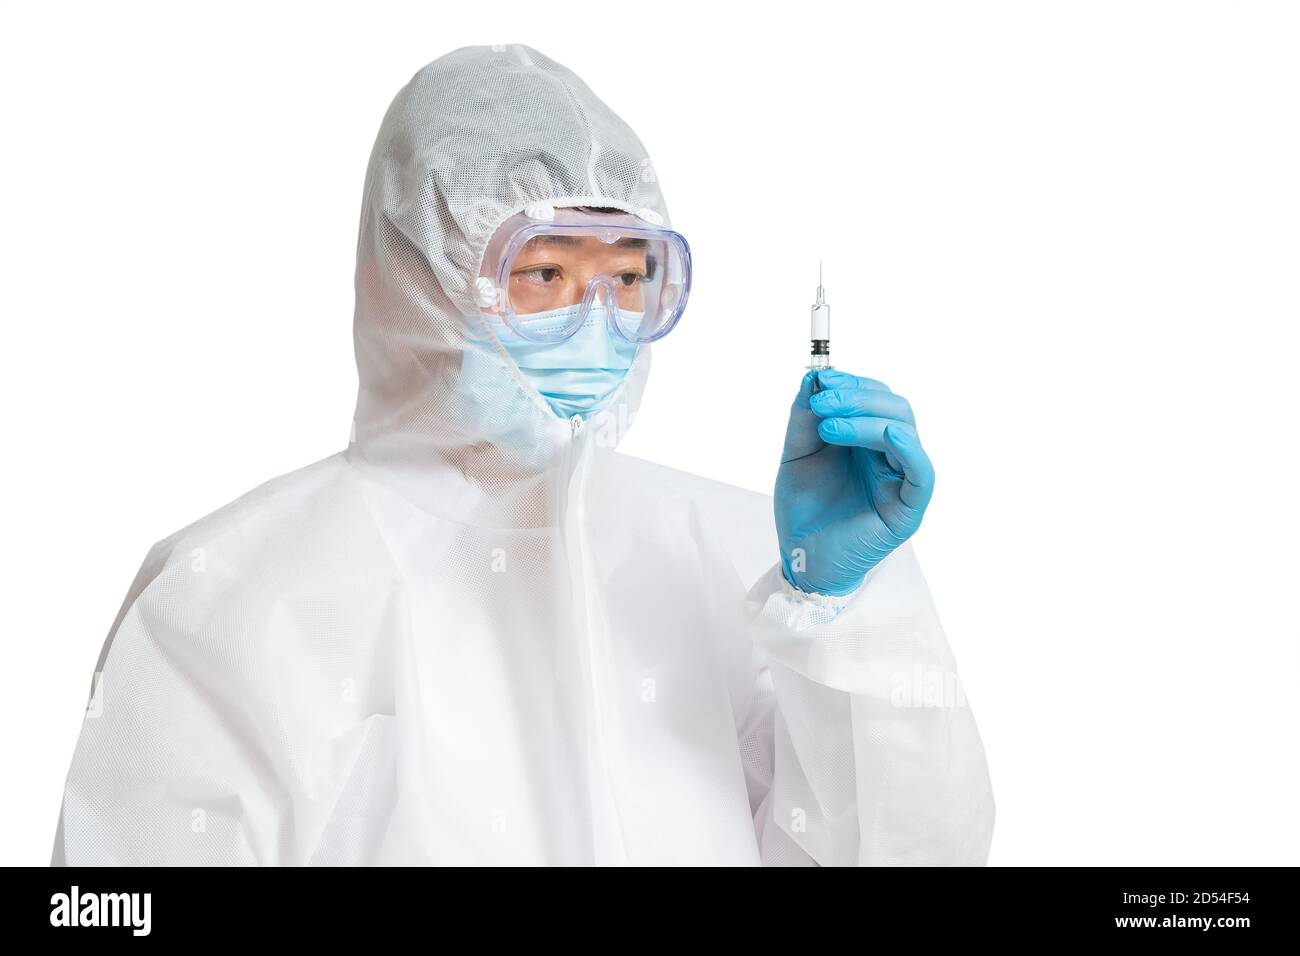 An Asian man wearing a protective suit, protective face masks, and safety glasses on a white background. Stock Photo